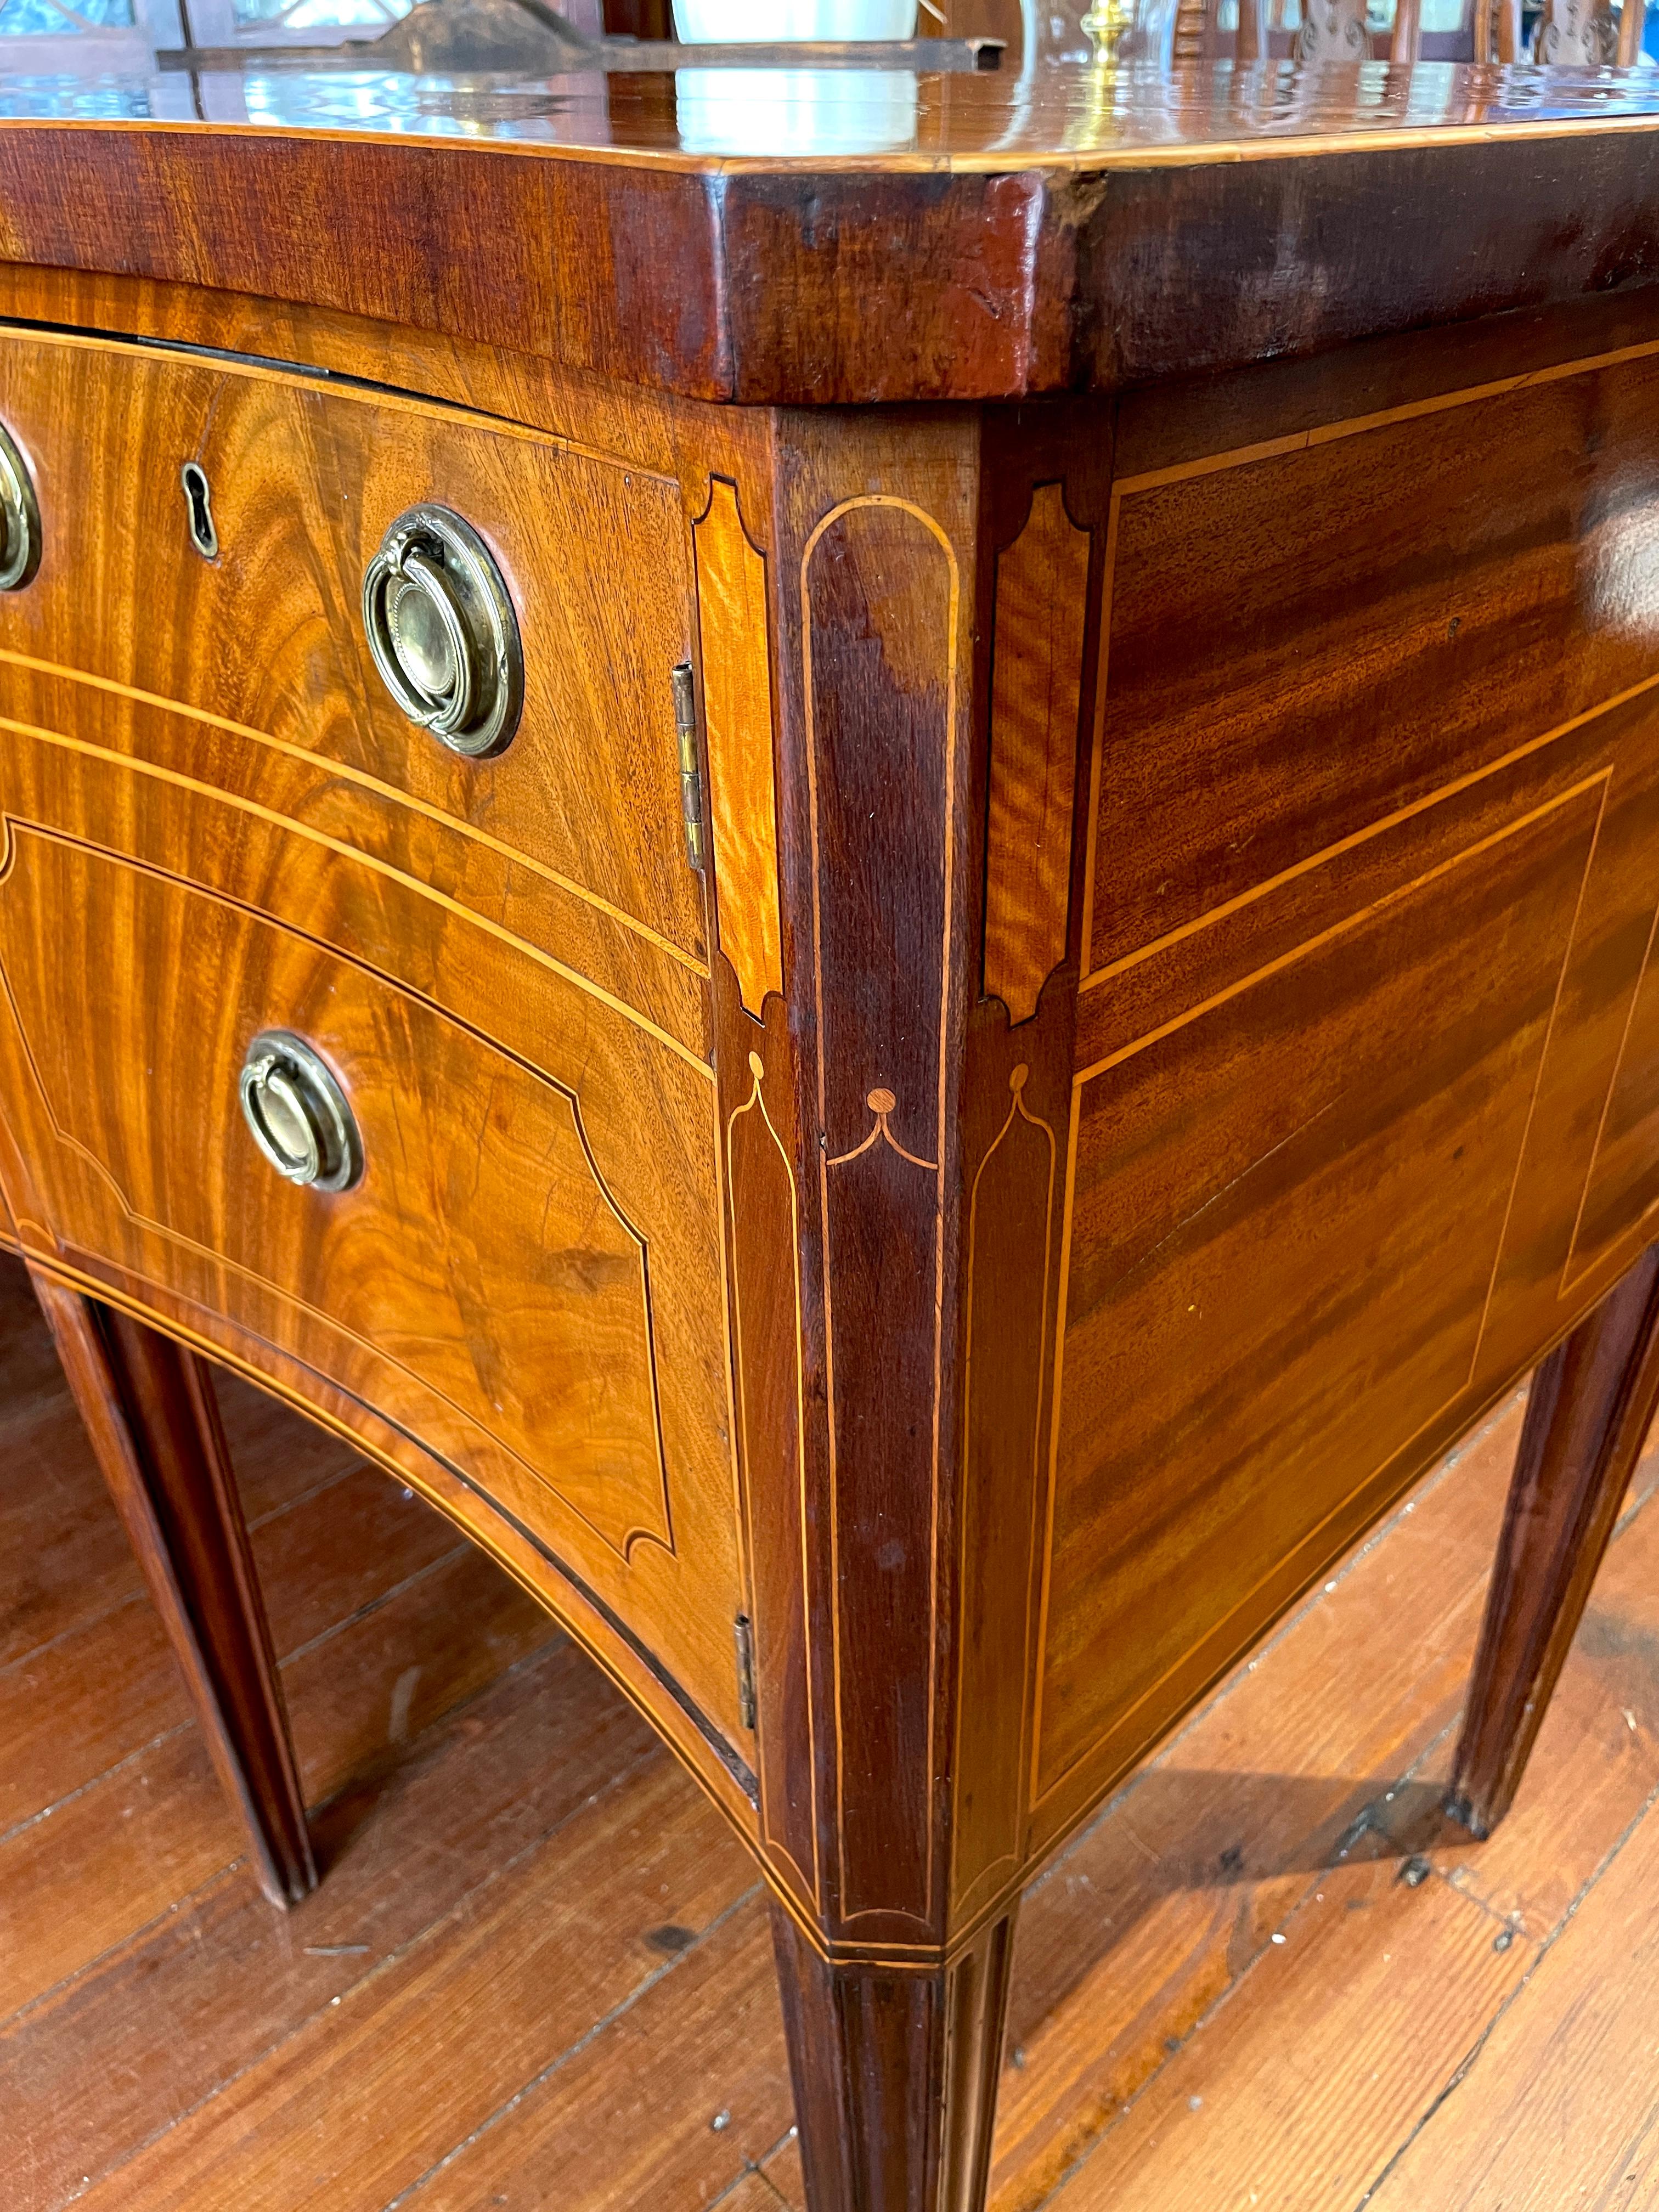  Protection de cheminée ancienne III Inlaid Bookmatched Crotch Mahog. Hepp. Style Buffet en vente 2